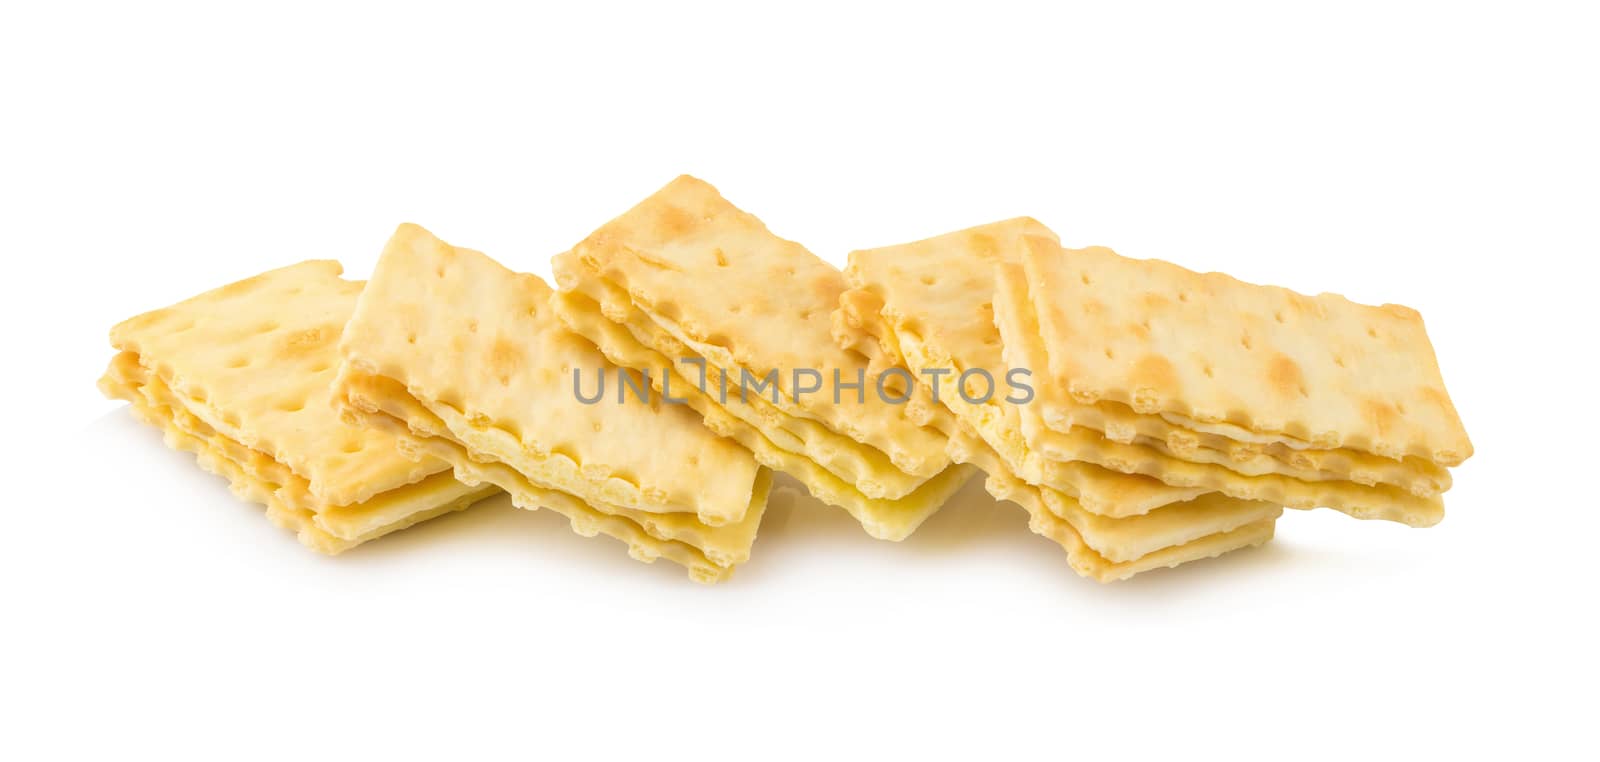 Cracker with creamy layer isolated on white background by kaiskynet